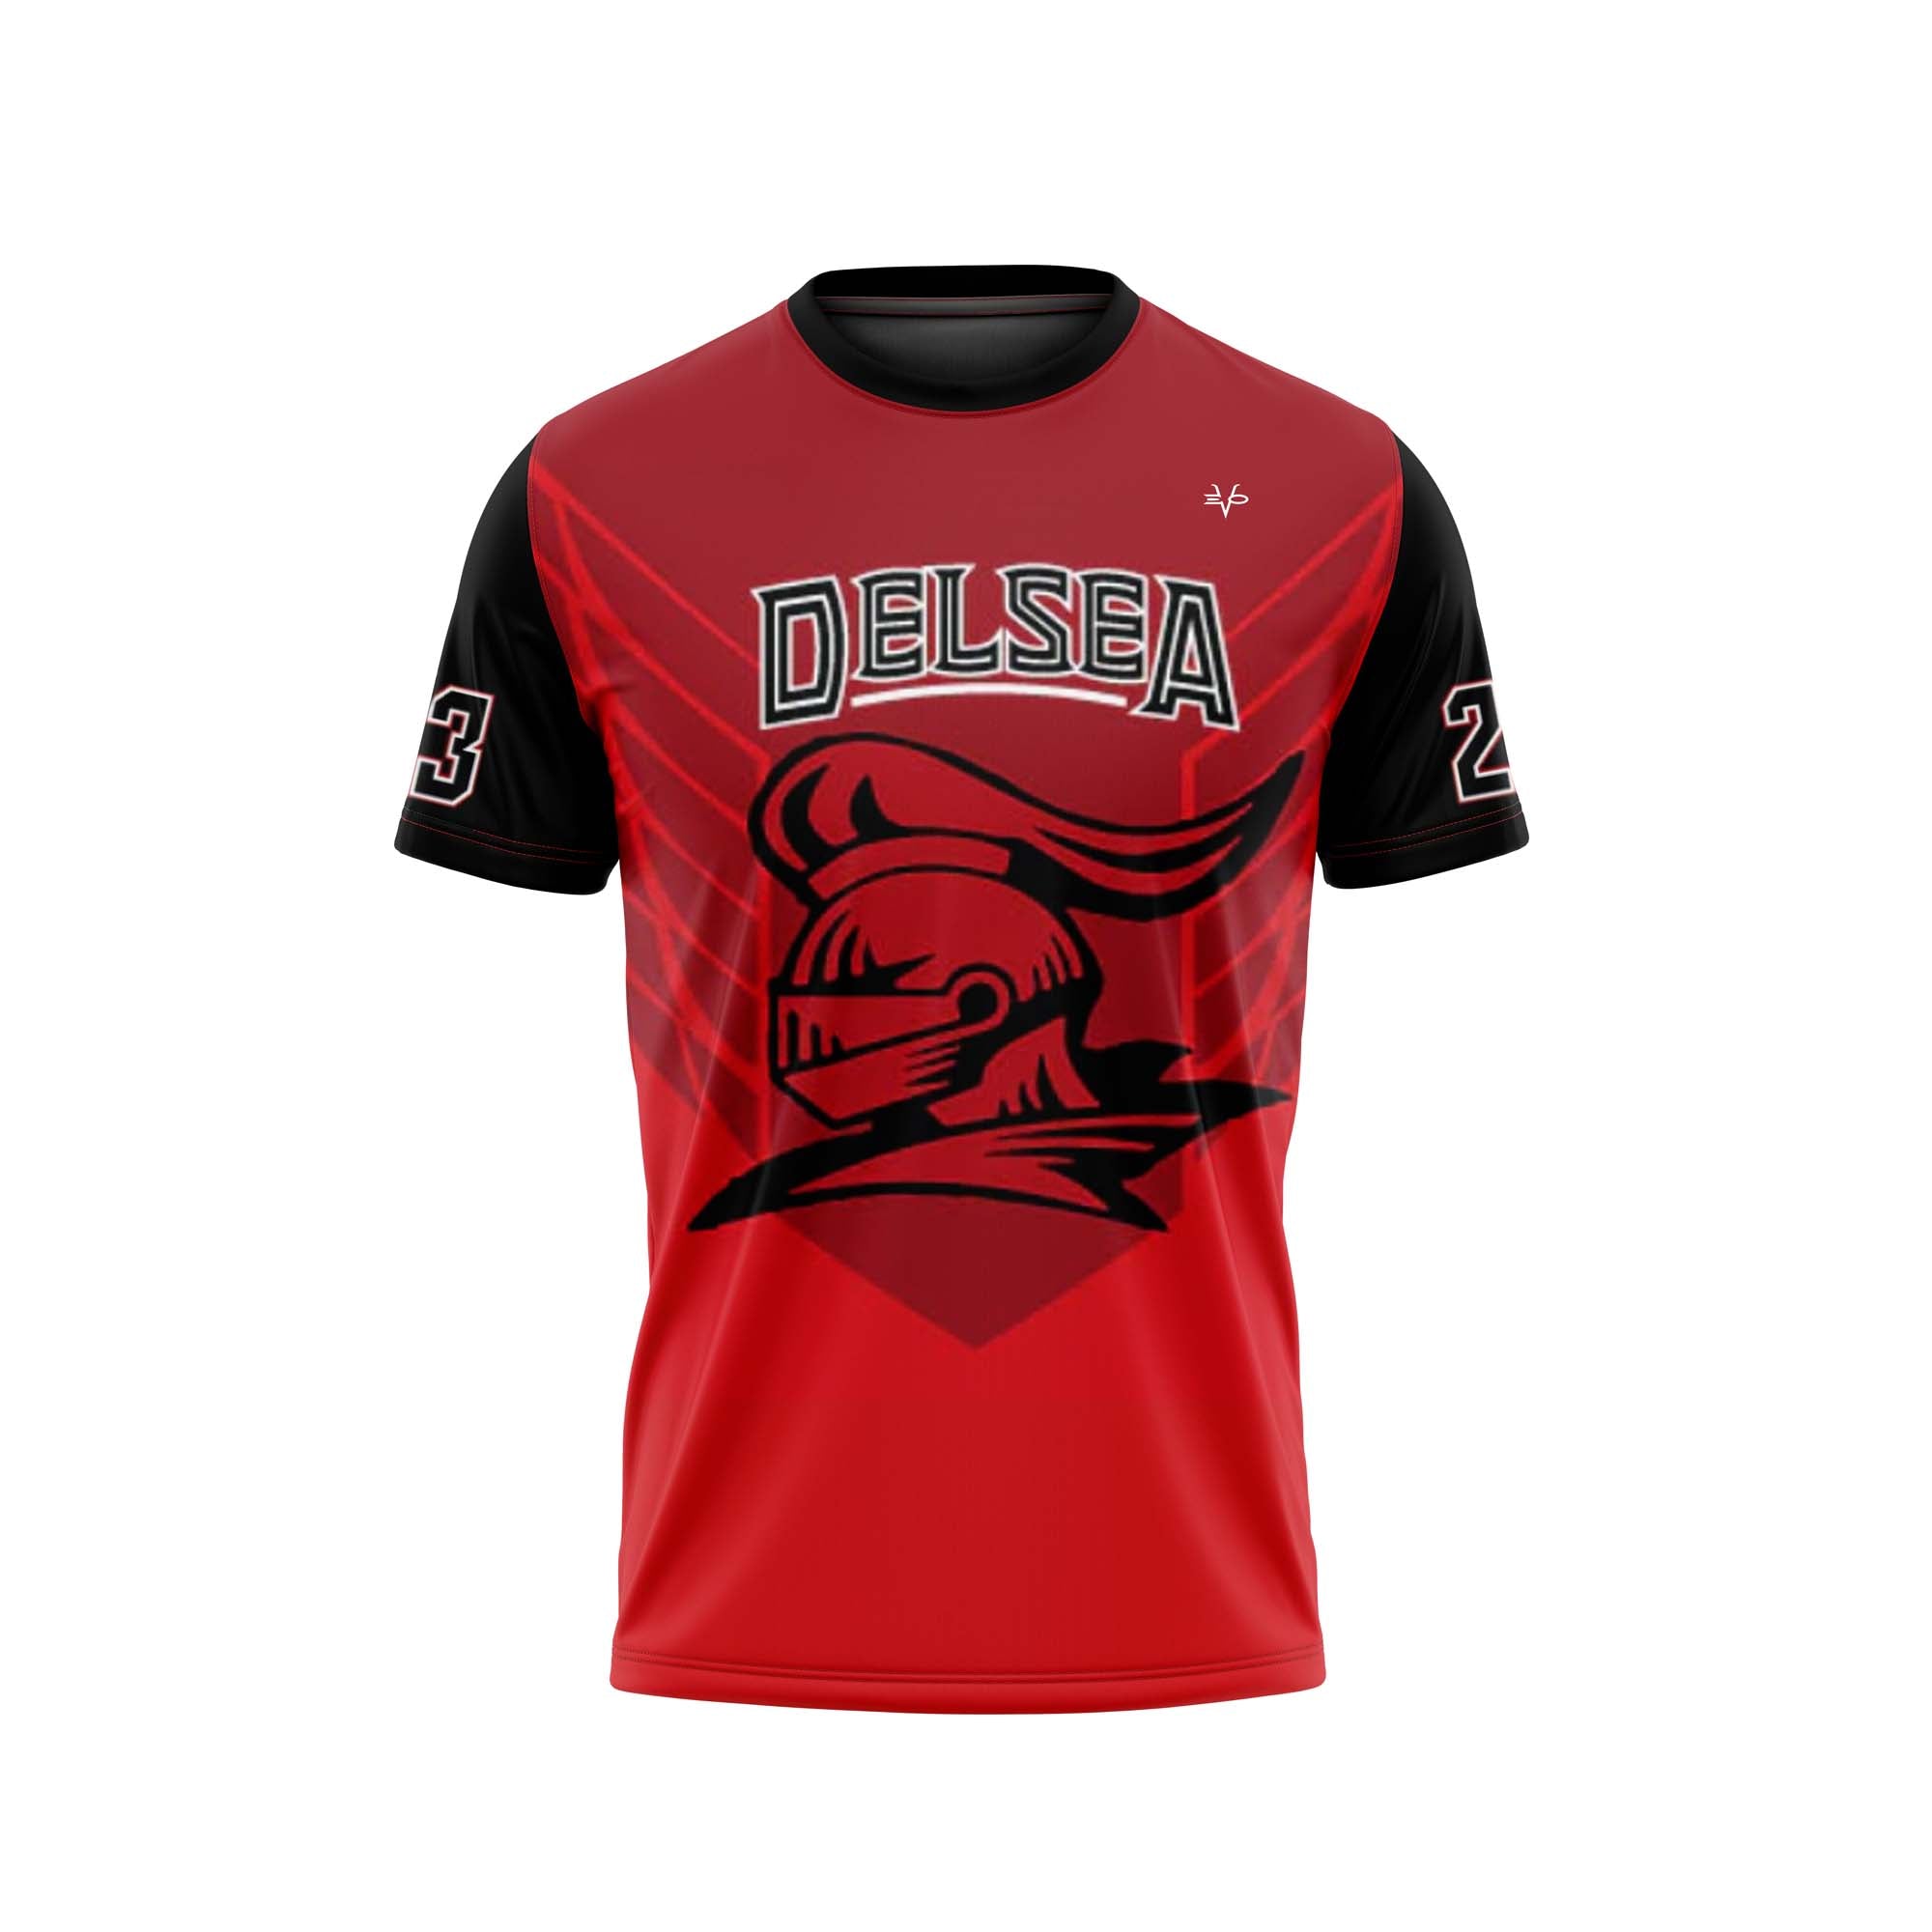 DELSEA KNIGHTS Football Sublimated Crew Neck Jersey